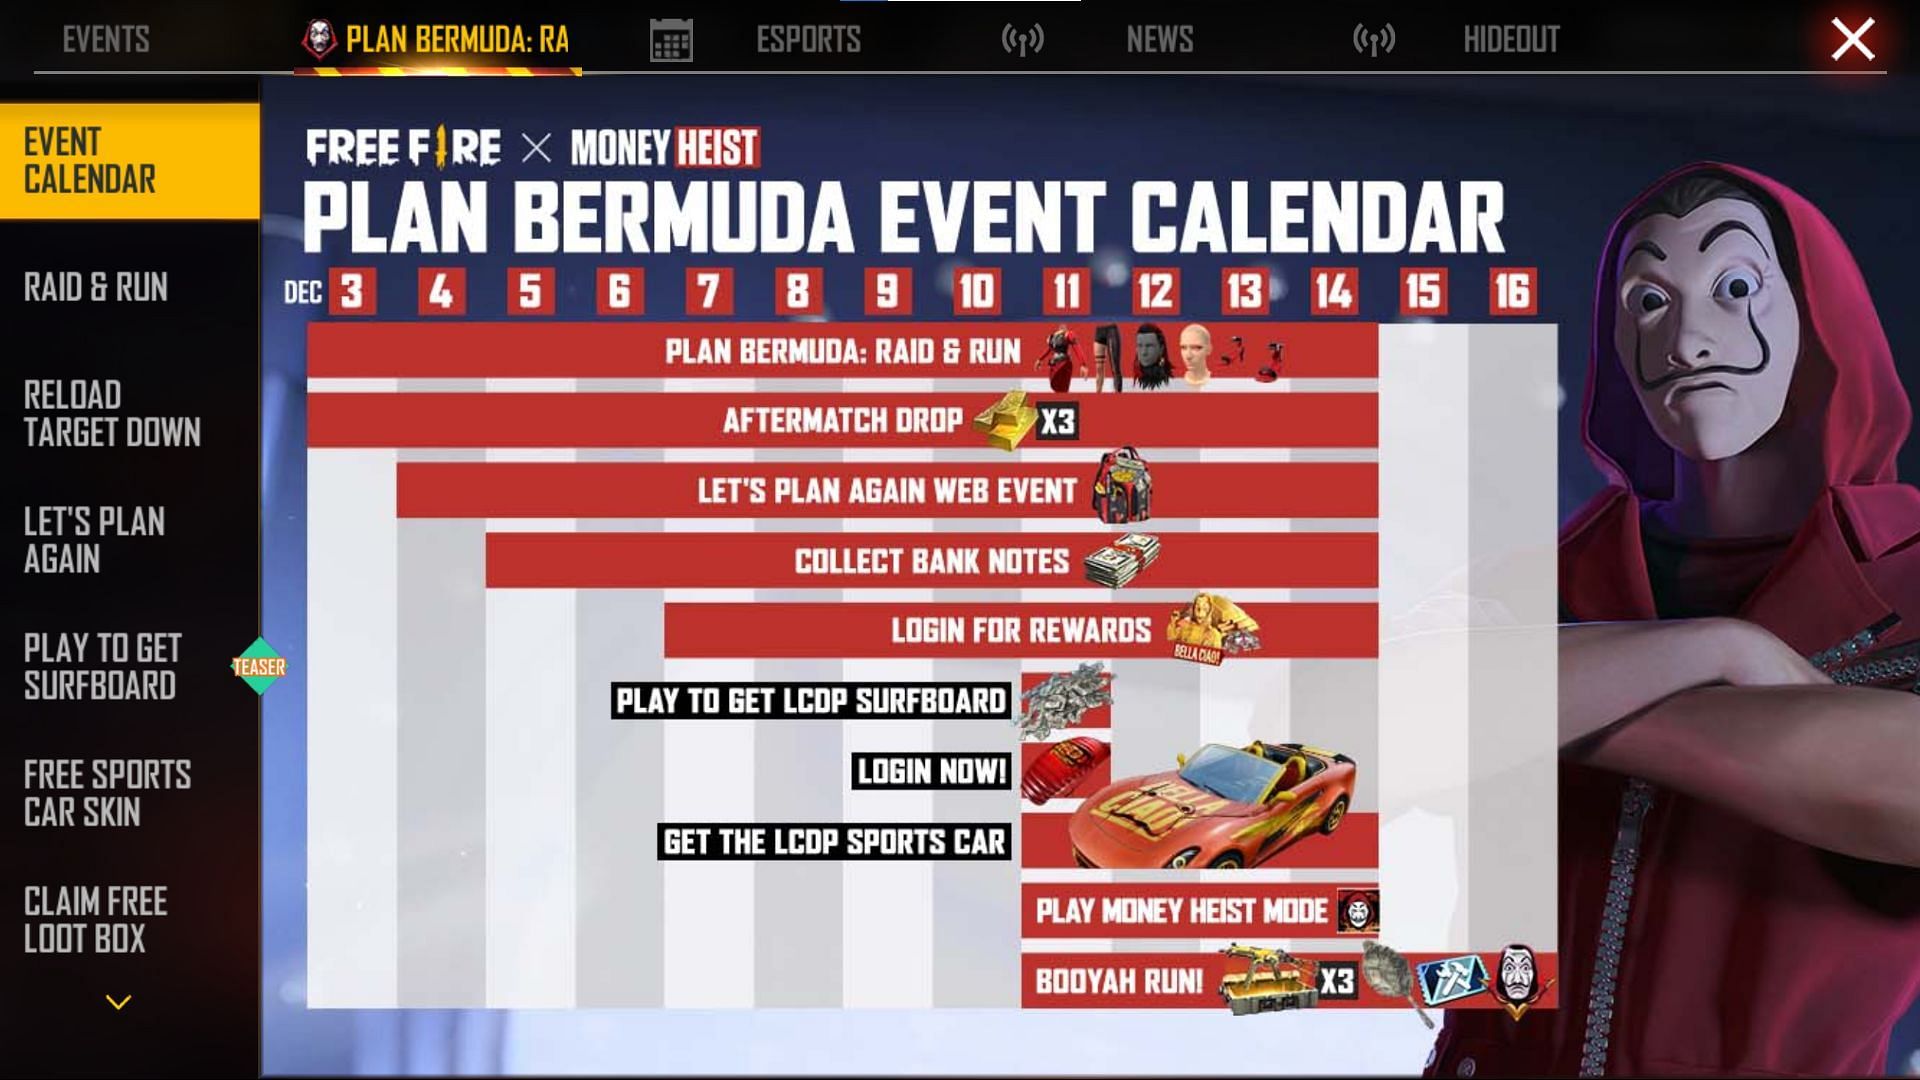 This is the official event calendar of the collaboration (Image via Free Fire)